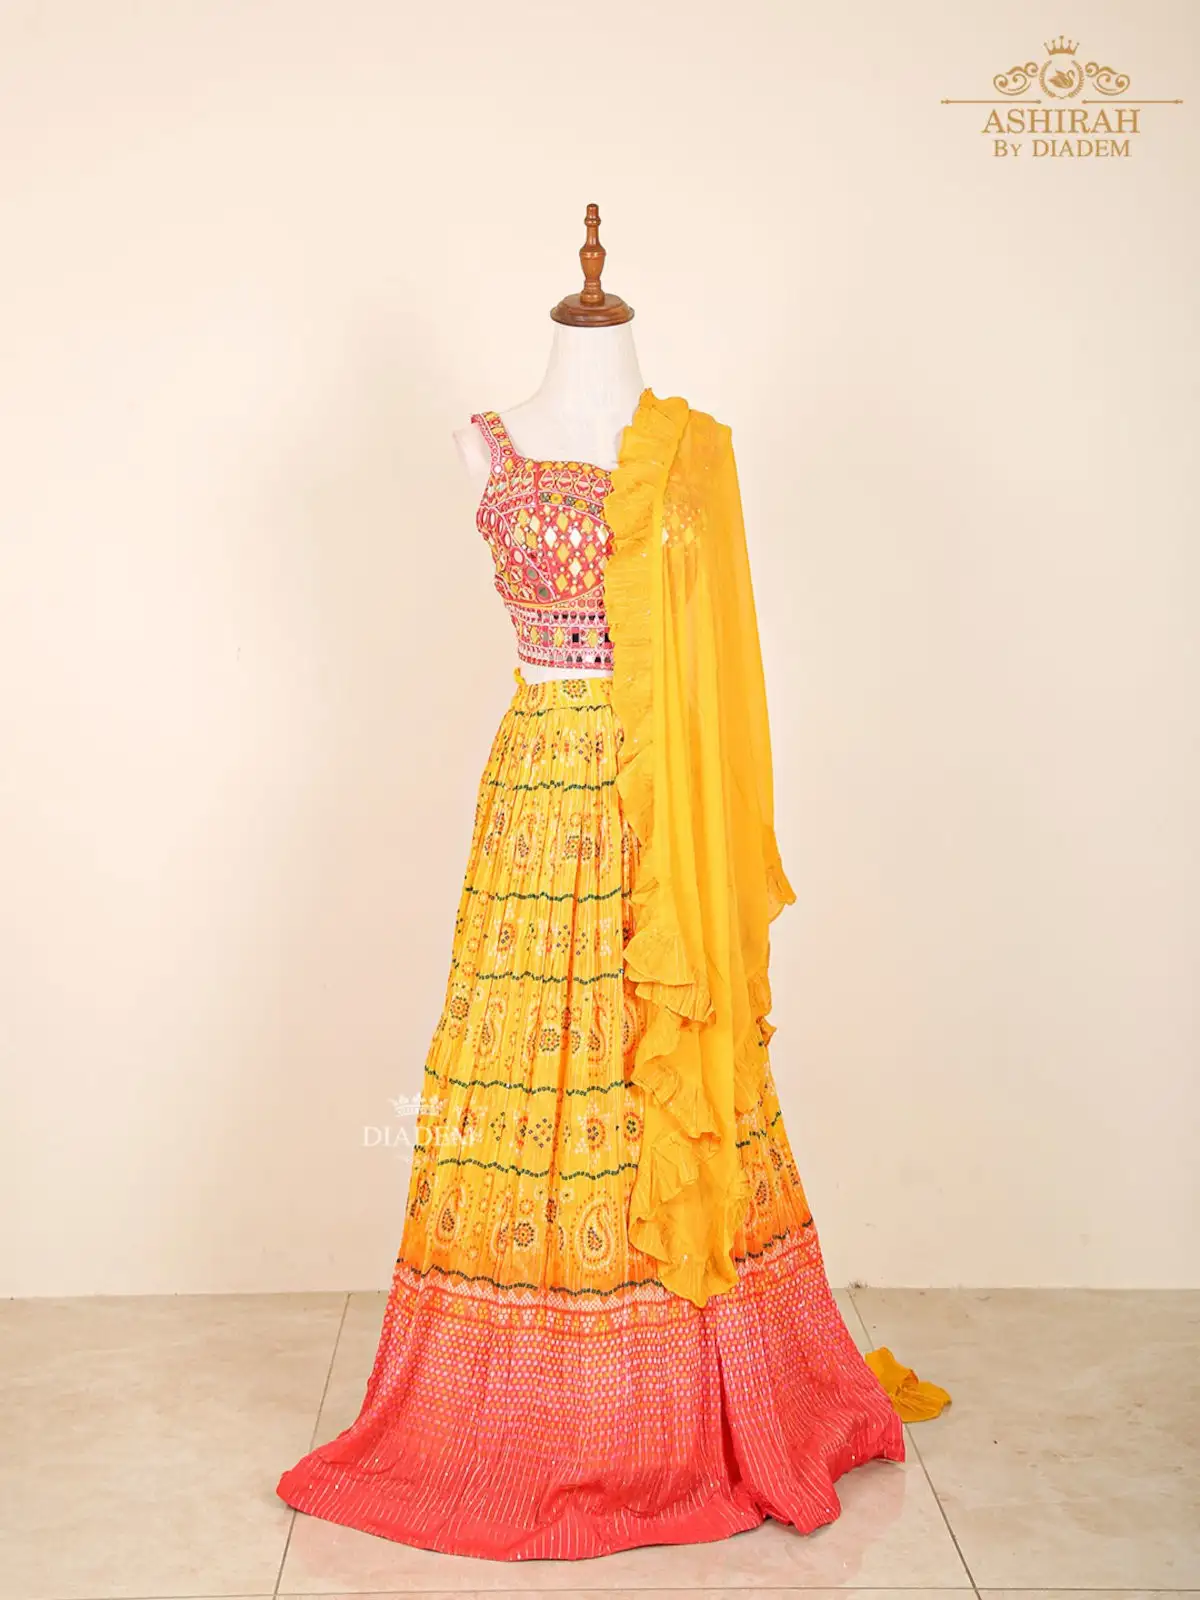 Sun Yellow Lehenga Adorned in Paisley Prints and Embroideries with Dupatta